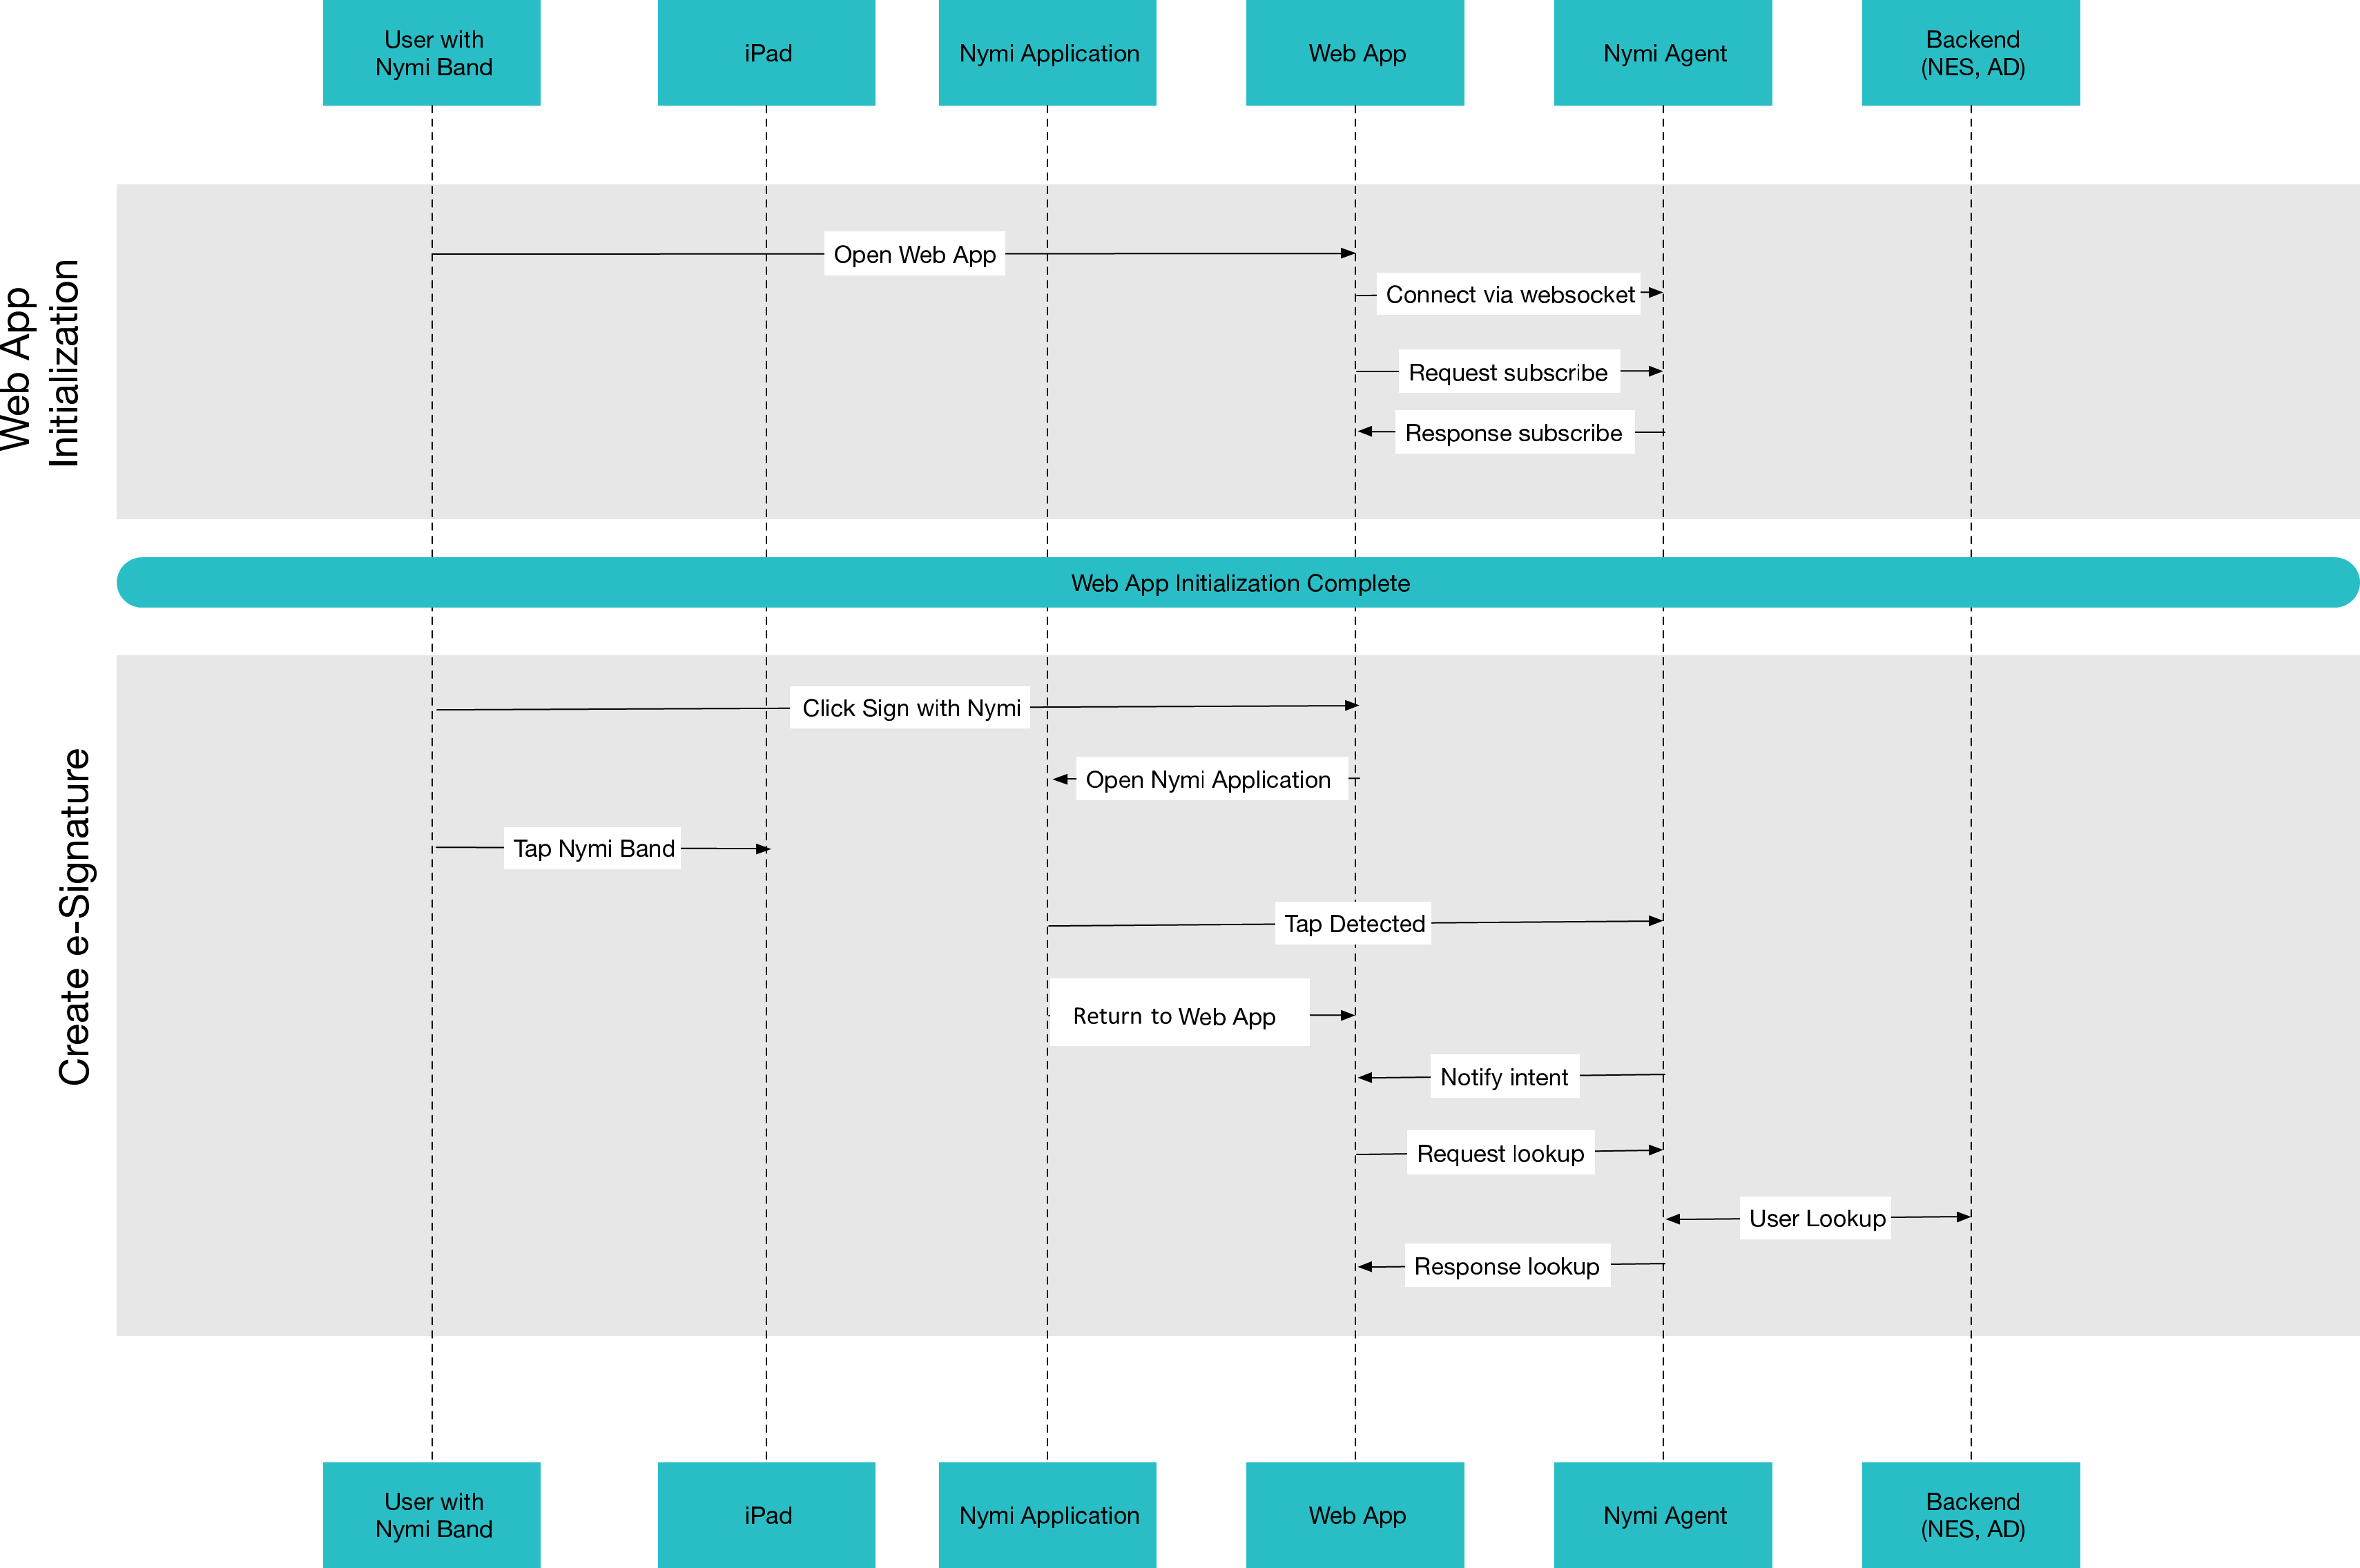 webapi_ios_overview.png